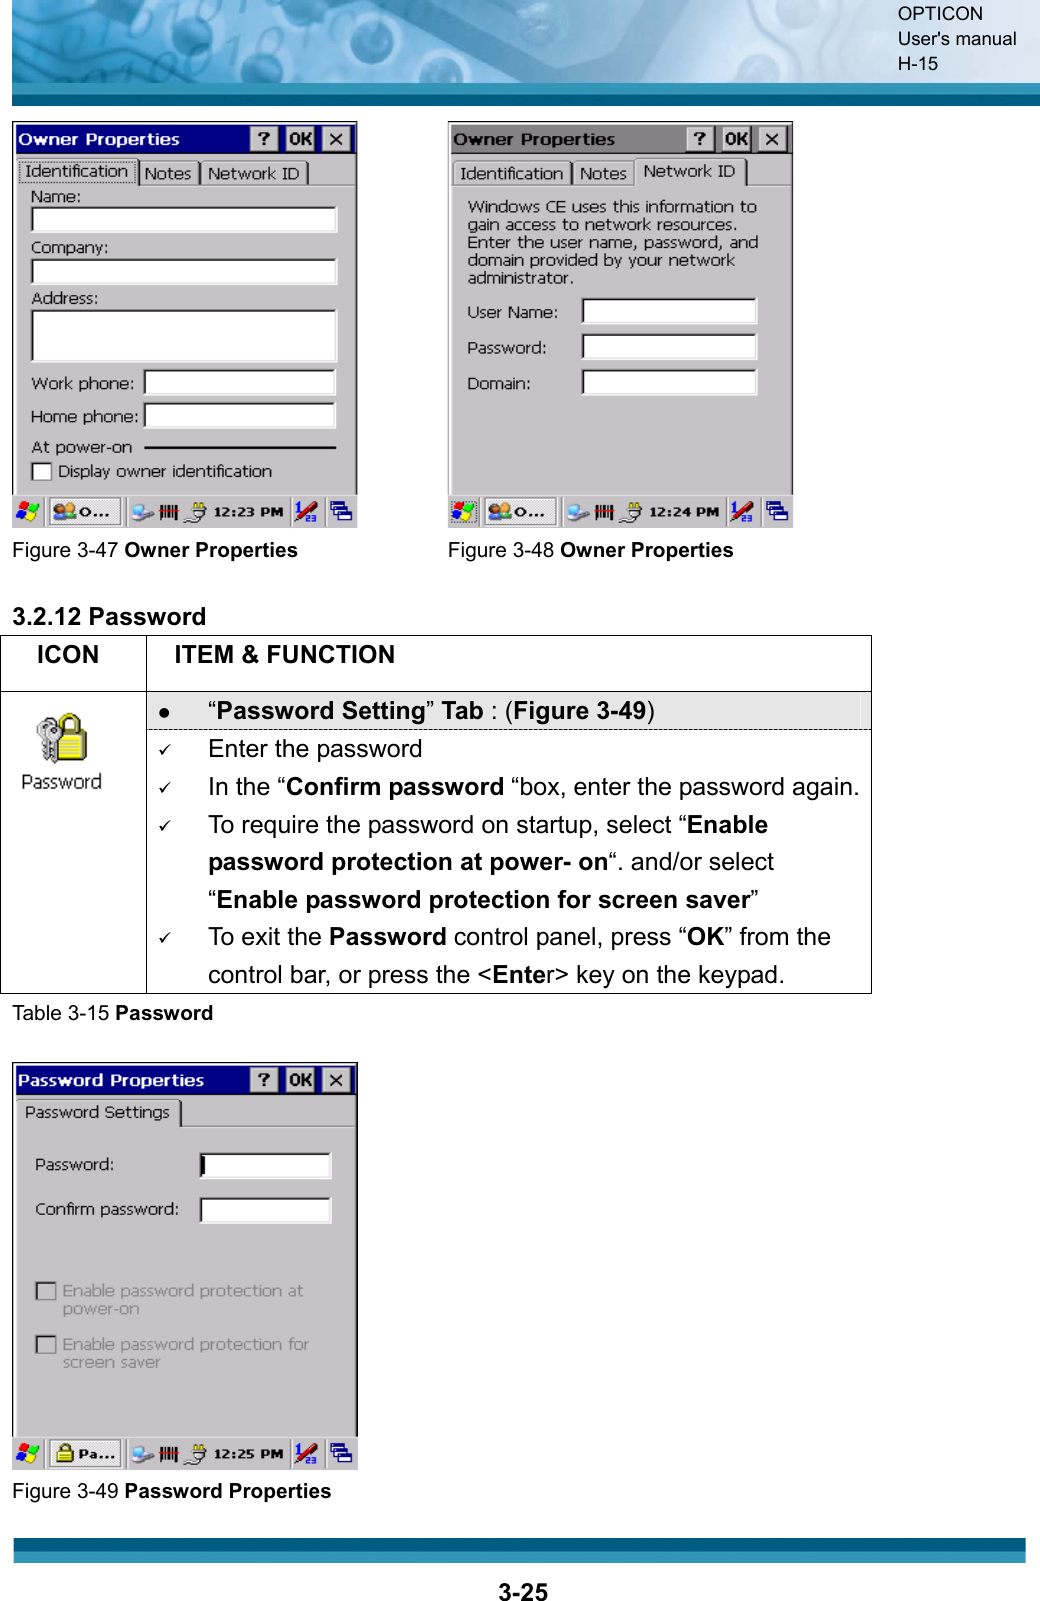 OPTICON User&apos;s manual H-153-25Figure 3-47 Owner Properties  Figure 3-48 Owner Properties3.2.12 Password ICON ITEM &amp; FUNCTION z“Password Setting”Tab : (Figure 3-49)9Enter the password9In the “Confirm password “box, enter the password again.9To require the password on startup, select “Enable password protection at power- on“. and/or select “Enable password protection for screen saver”9To exit the Password control panel, press “OK” from the control bar, or press the &lt;Enter&gt; key on the keypad.Table 3-15 PasswordFigure 3-49 Password Properties